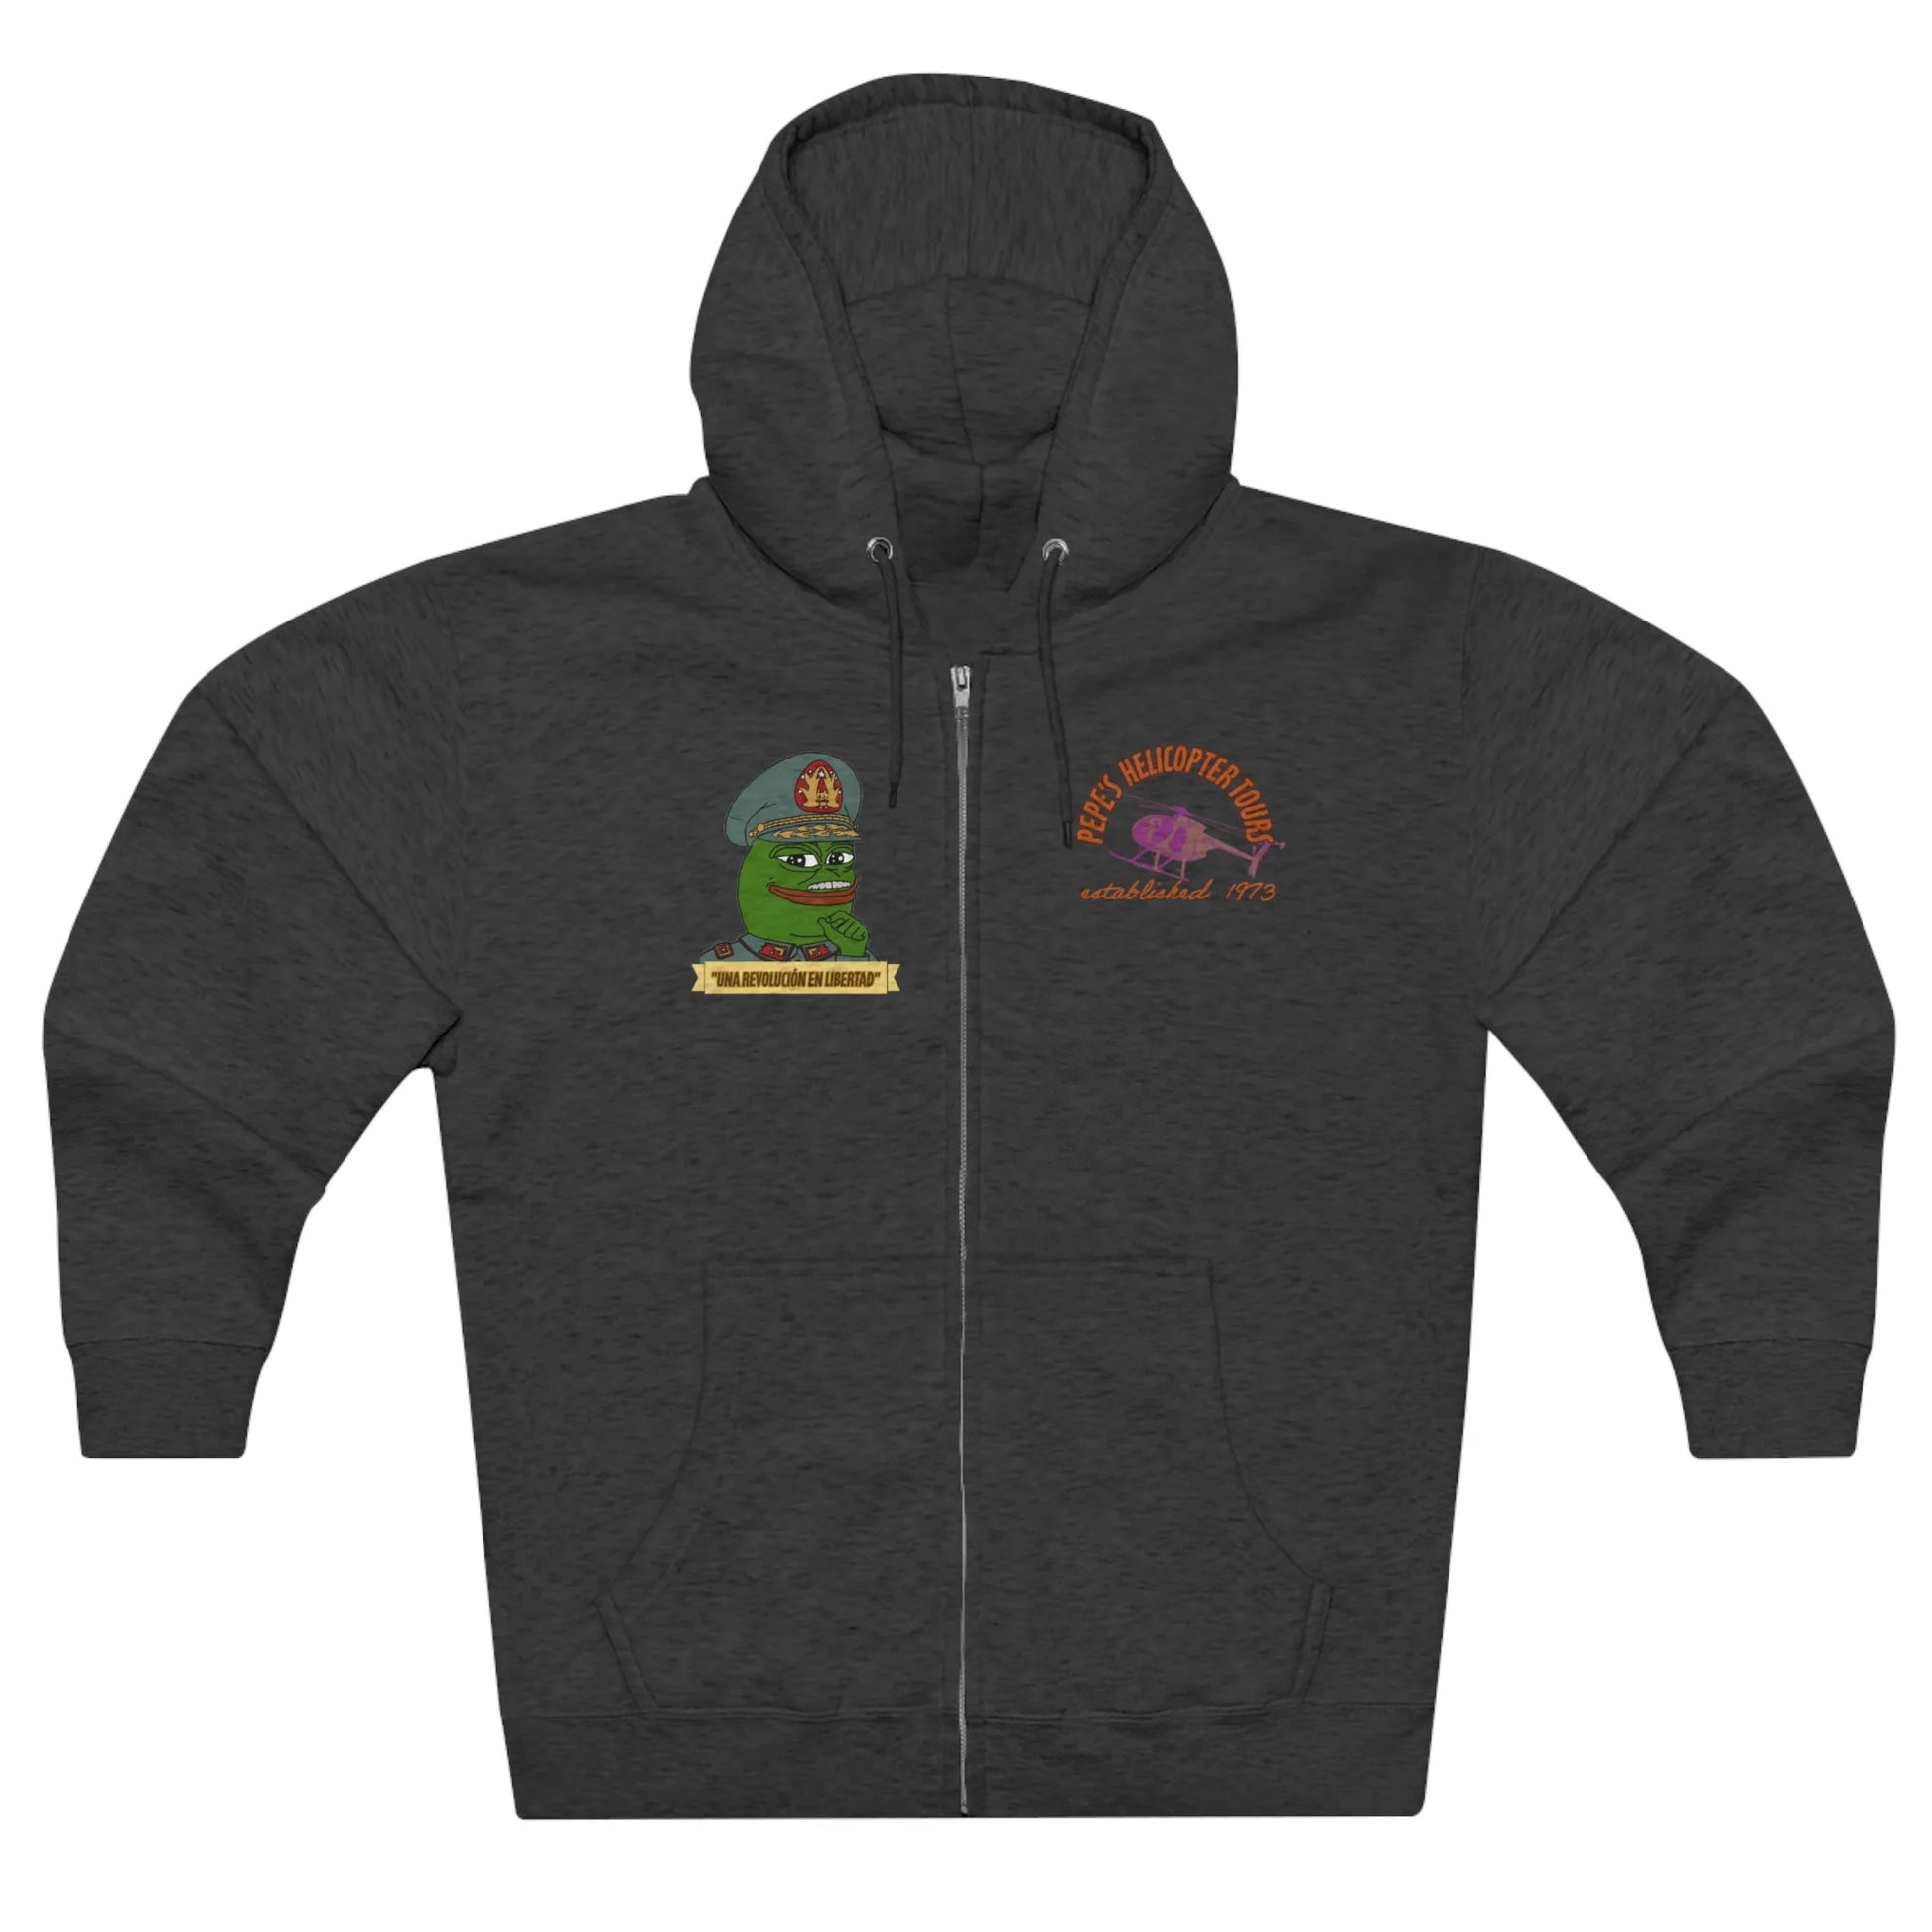 Pepe's Helicopter Tours Hoodie